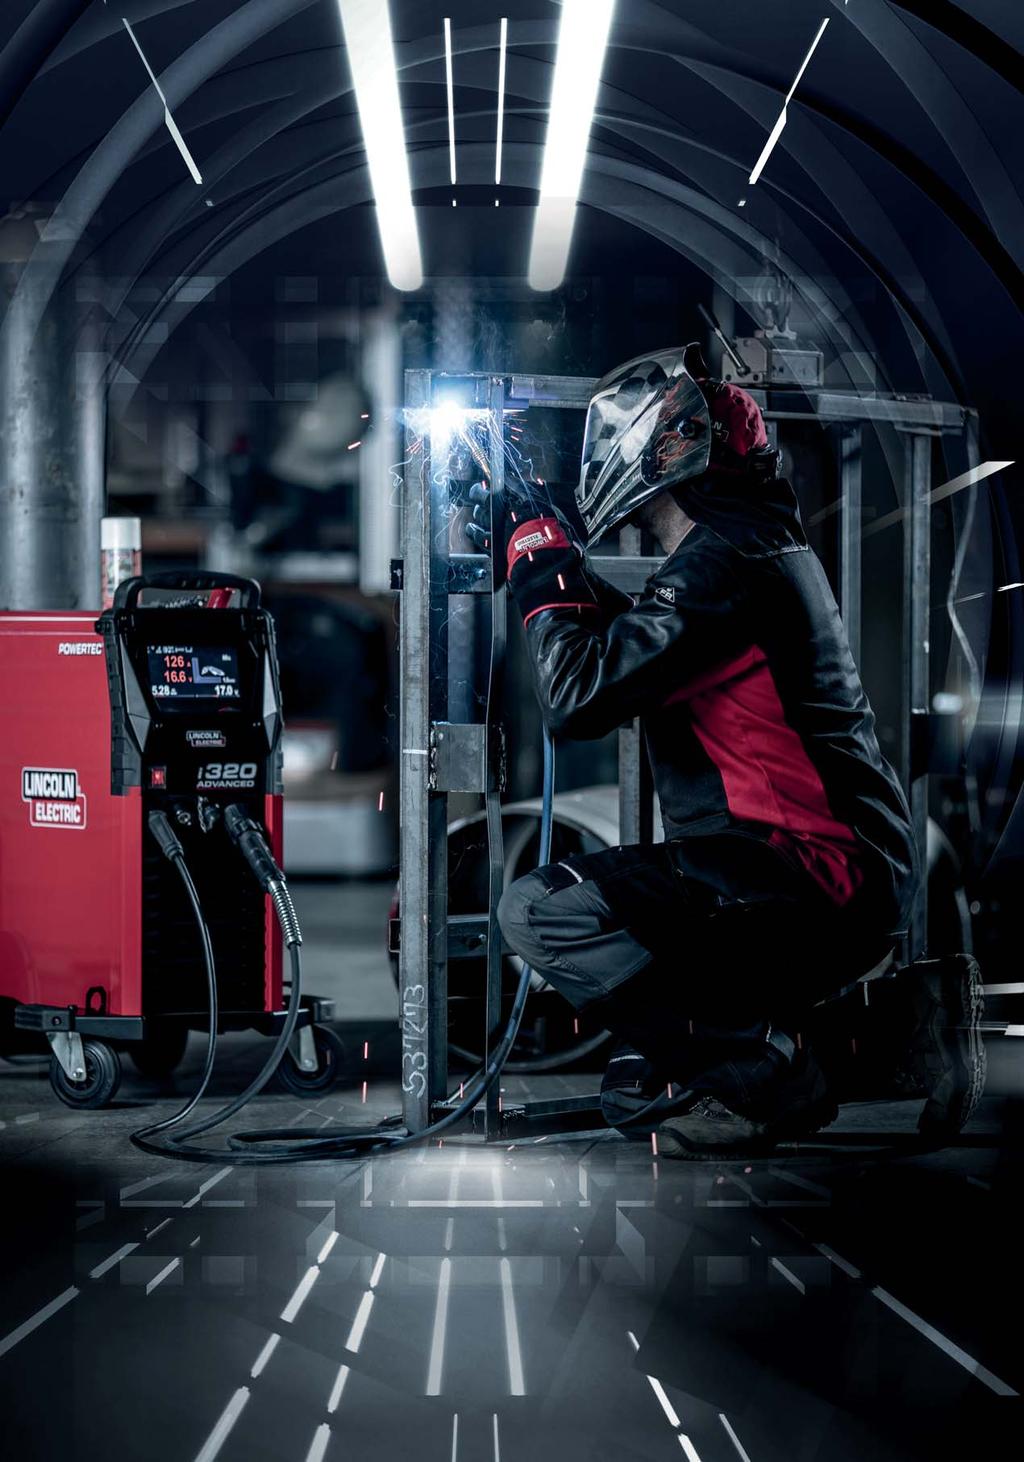 www.lincolnelectric.